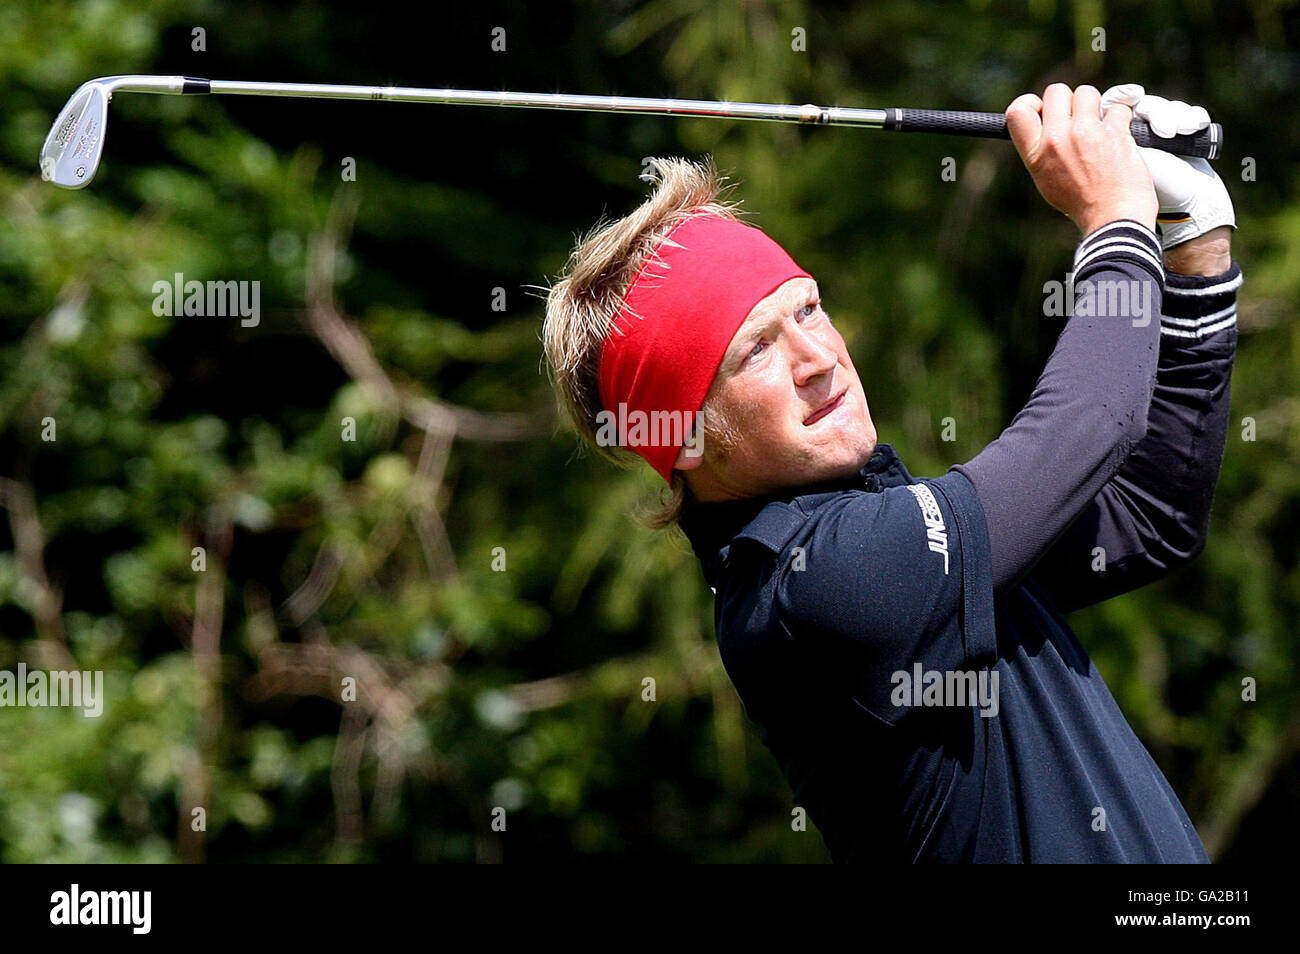 Golf - Smurfit Kappa European Open - Day Two - Ireland. Pelle Edberg in  action who finished on 8